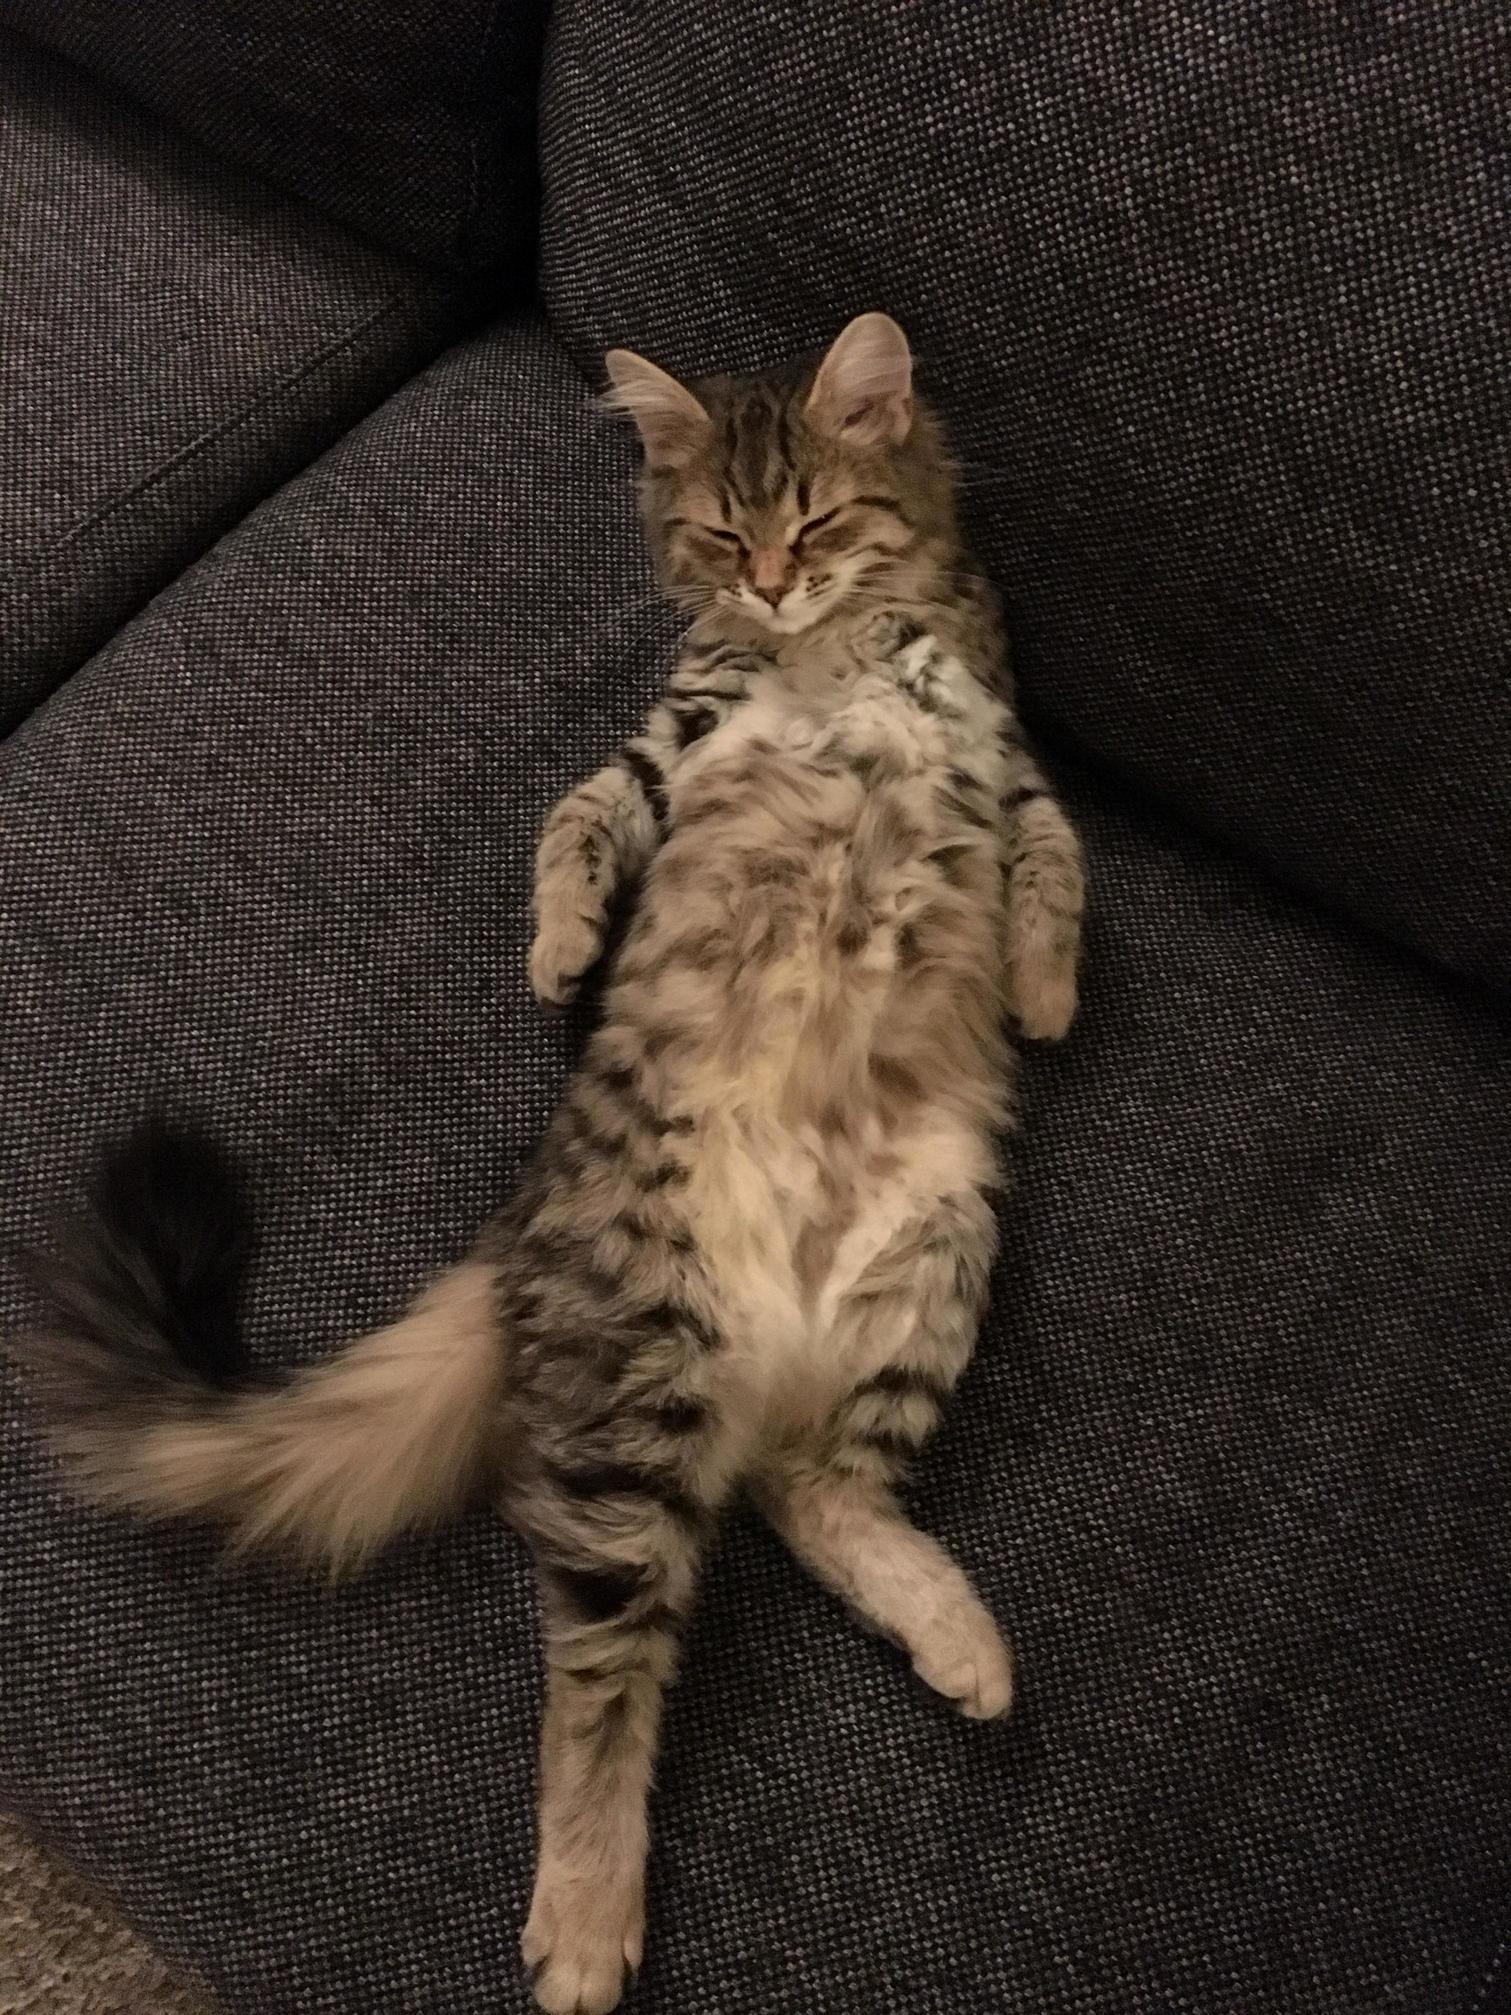 The fluffy tummy trap is set!